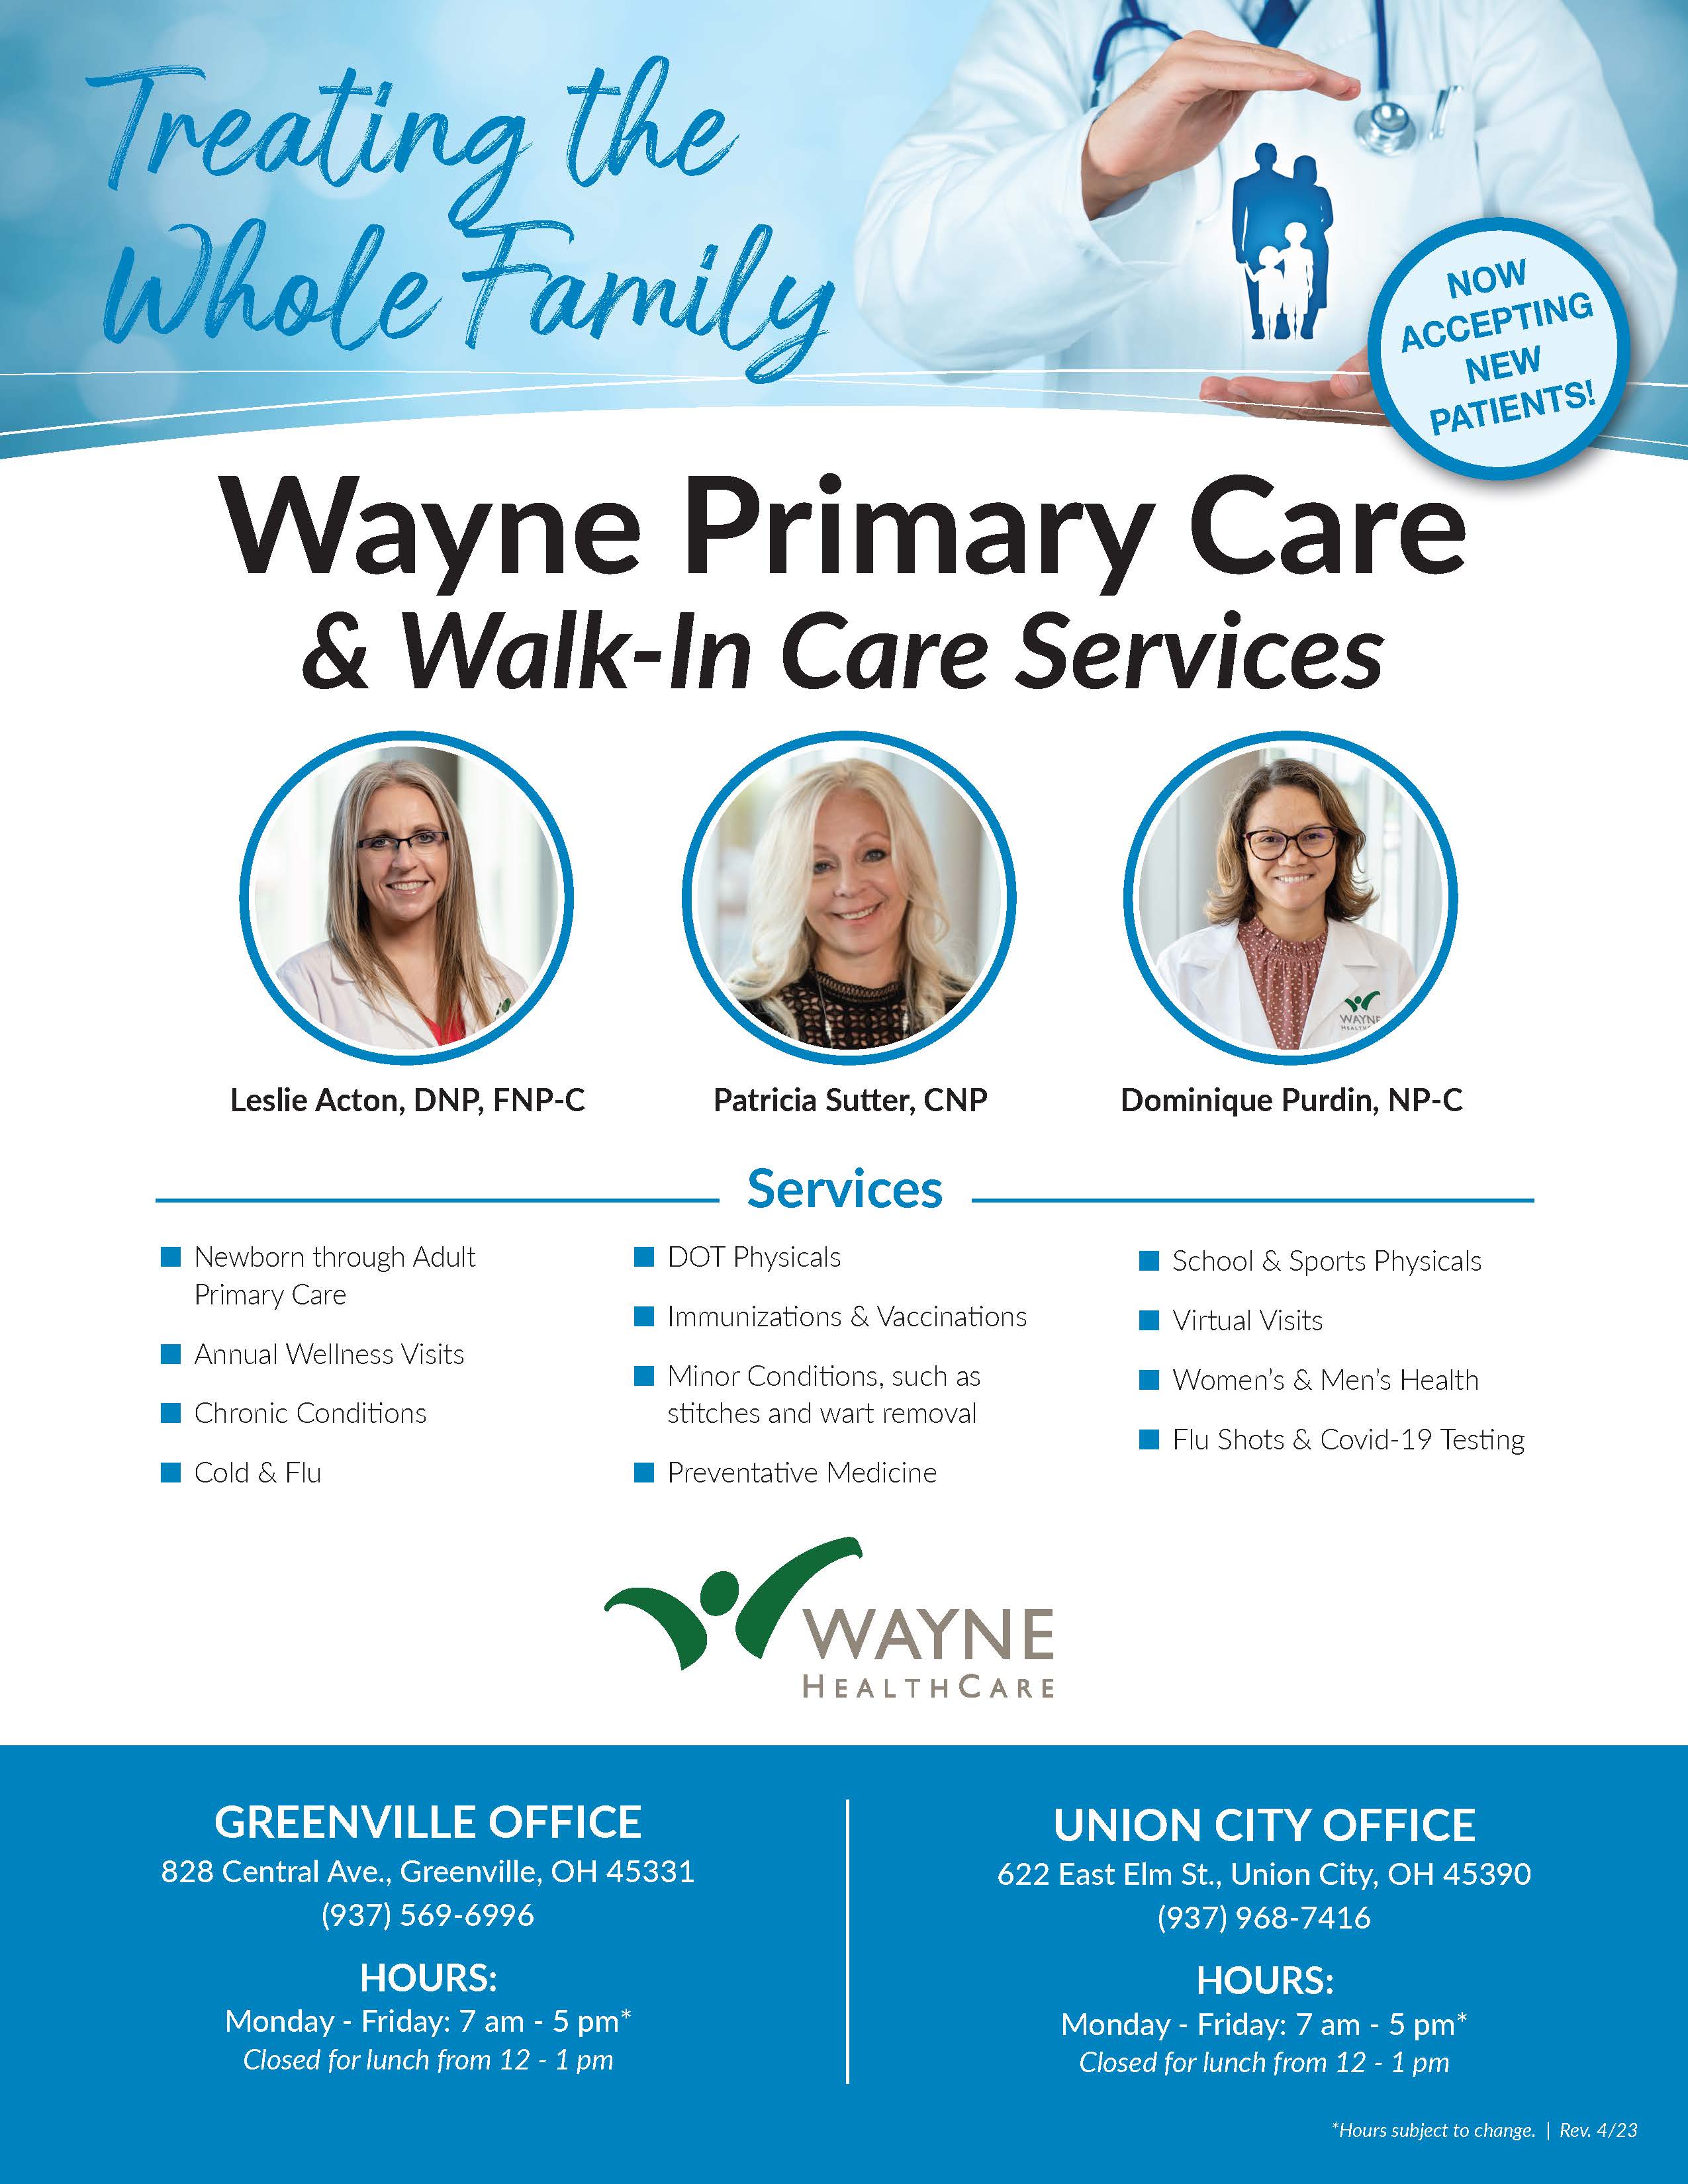 Photos of 3 Wayne Primary Care Providers along with list of services offered and business hours.